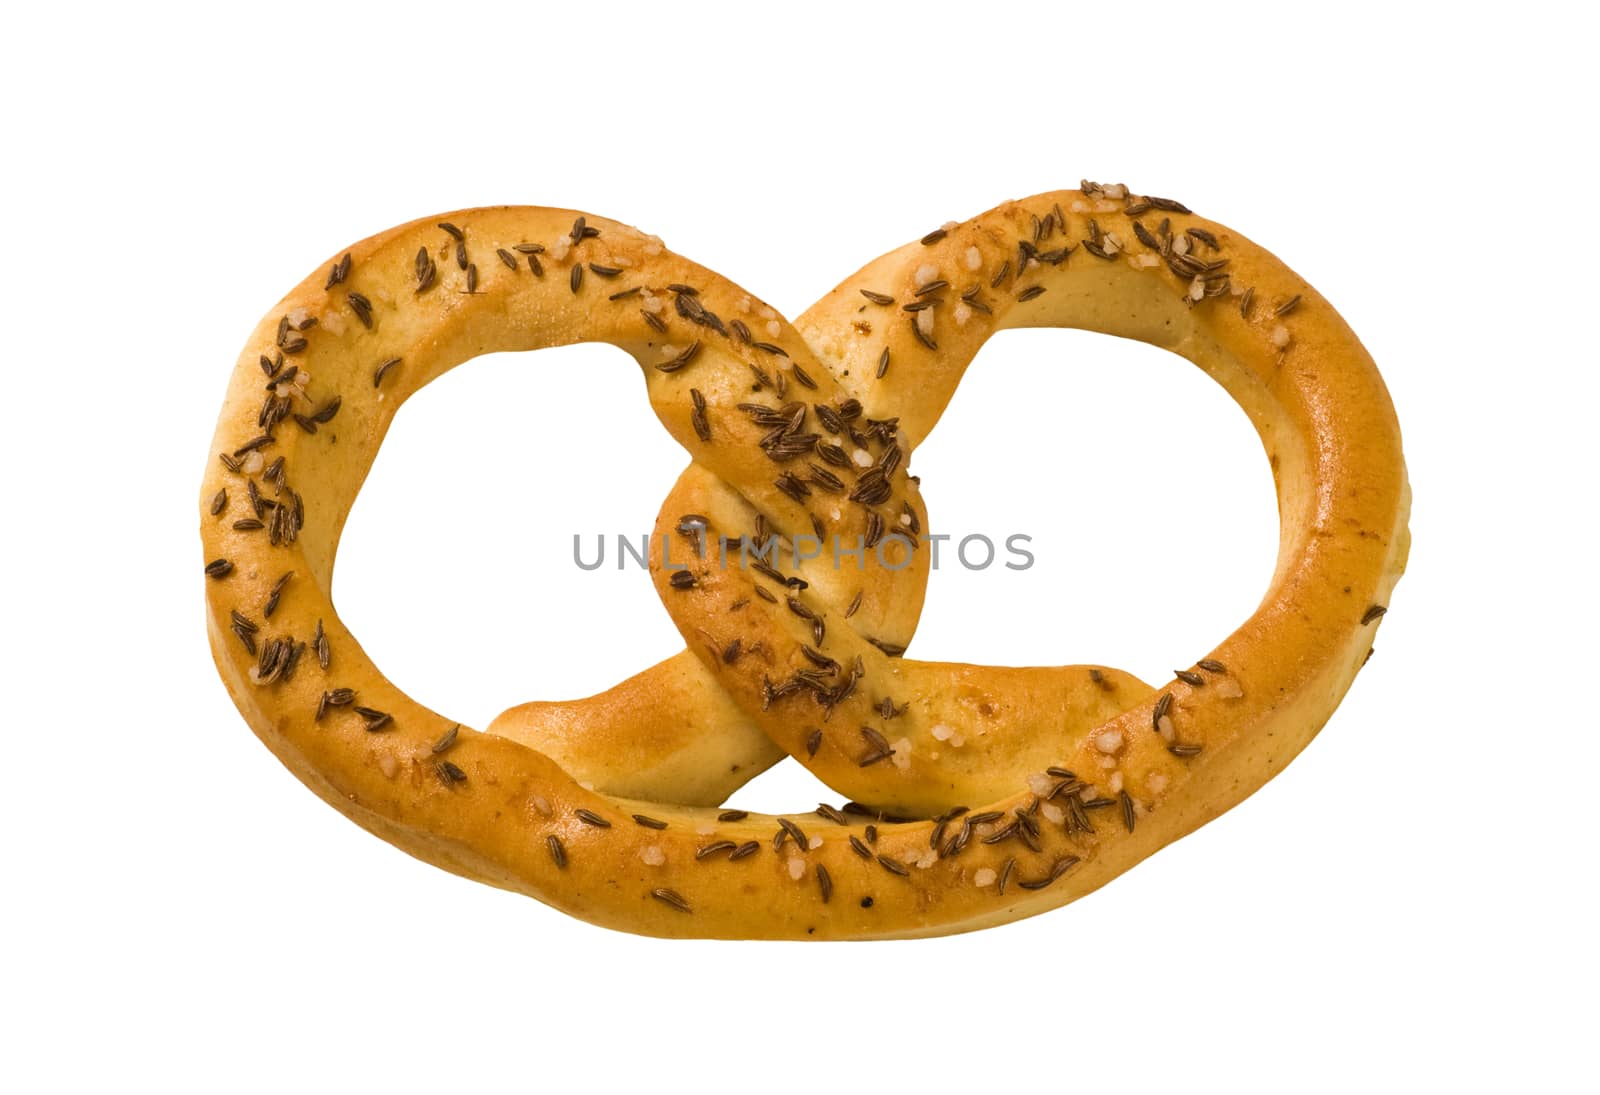 Pretzel topped with caraway and salt